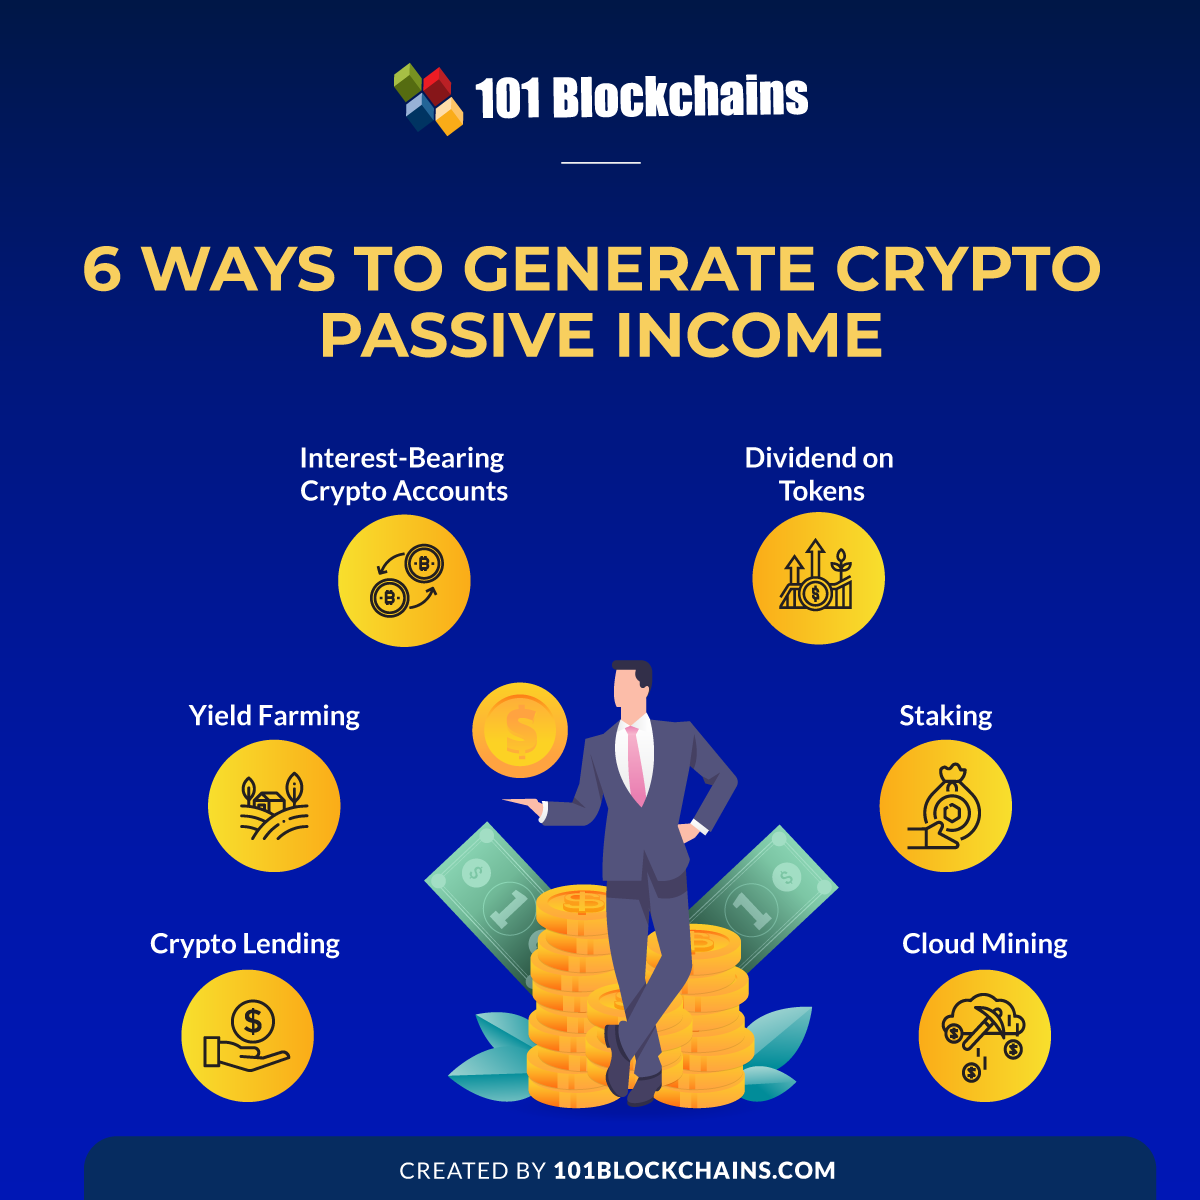 6 Ways to Generate Crypto Passive Income